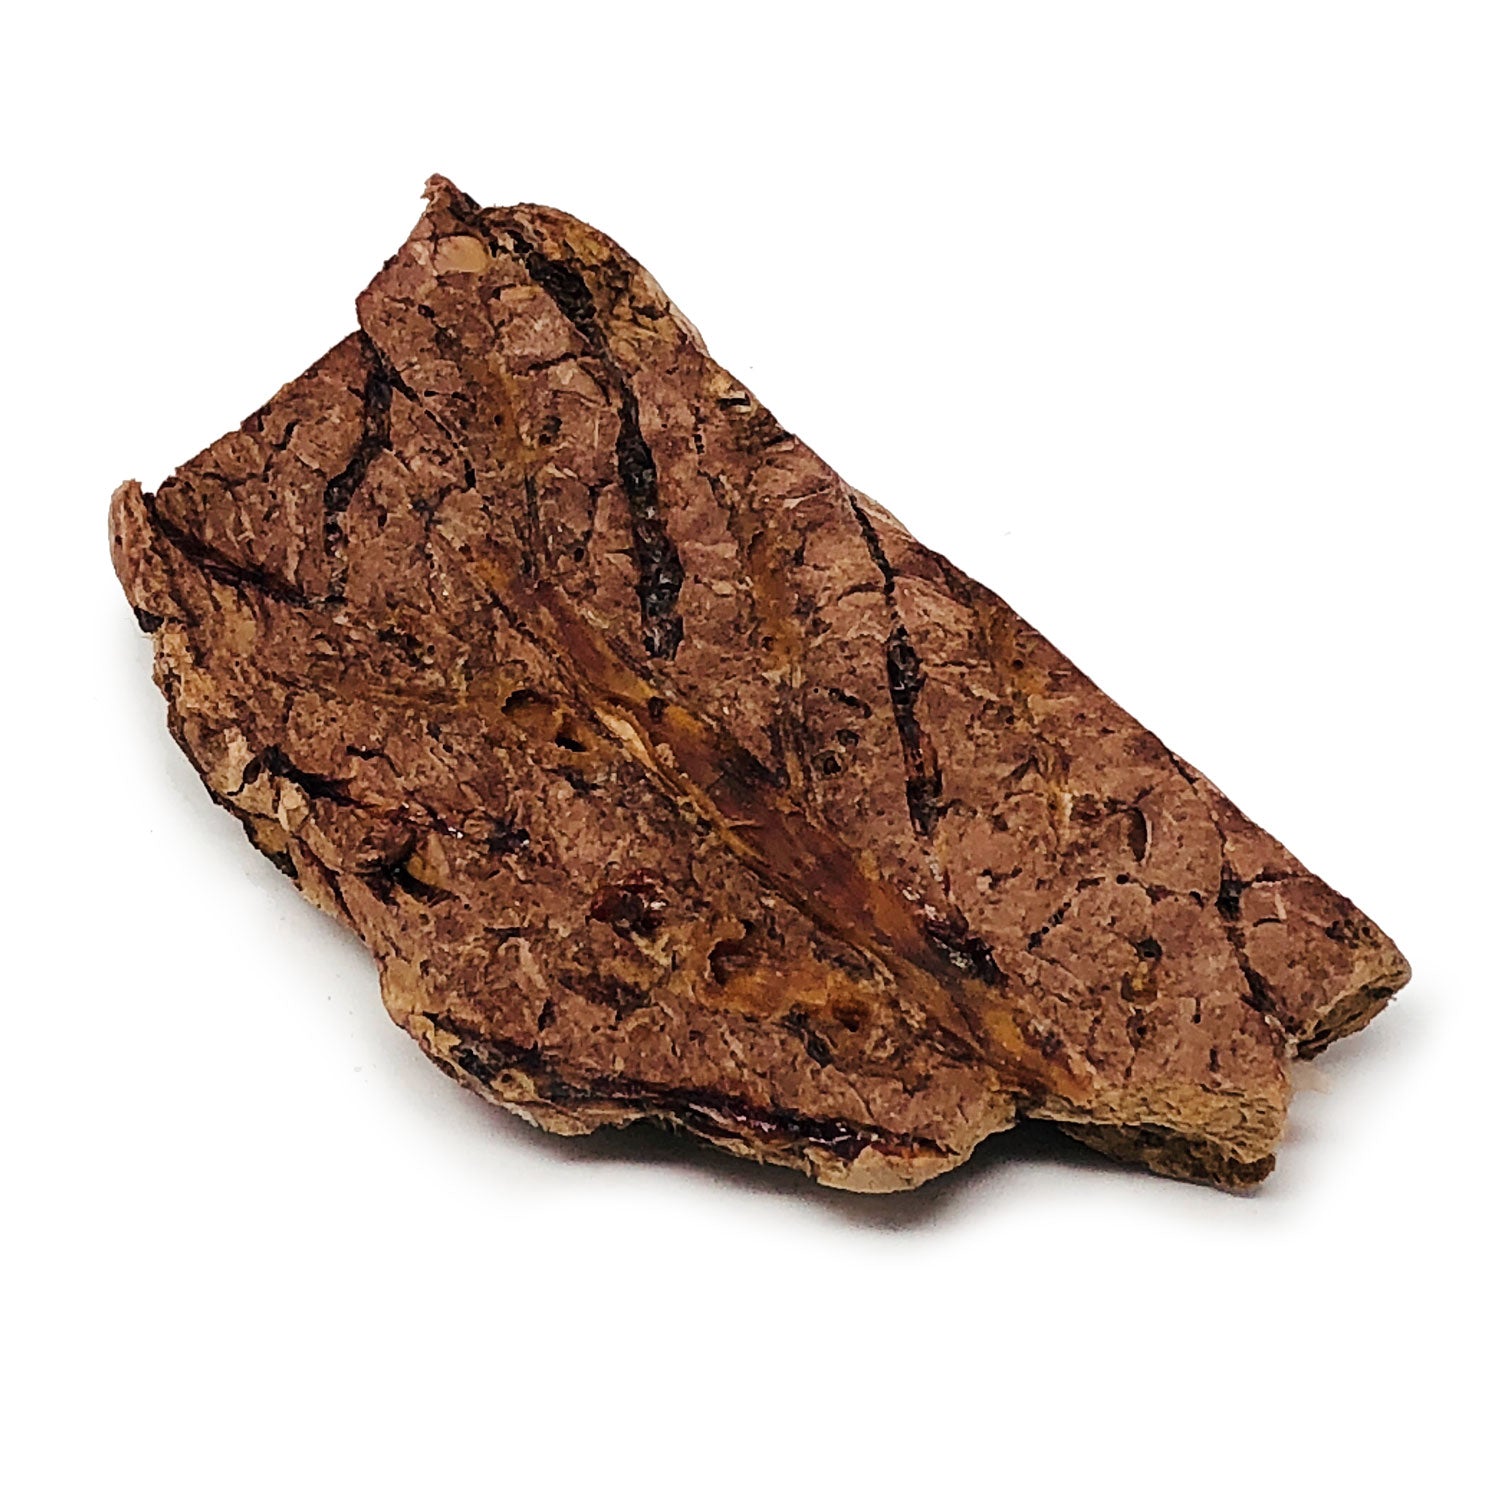 ValueBull USA Beef Lung Dog Chews, Sliced, 9 Pounds